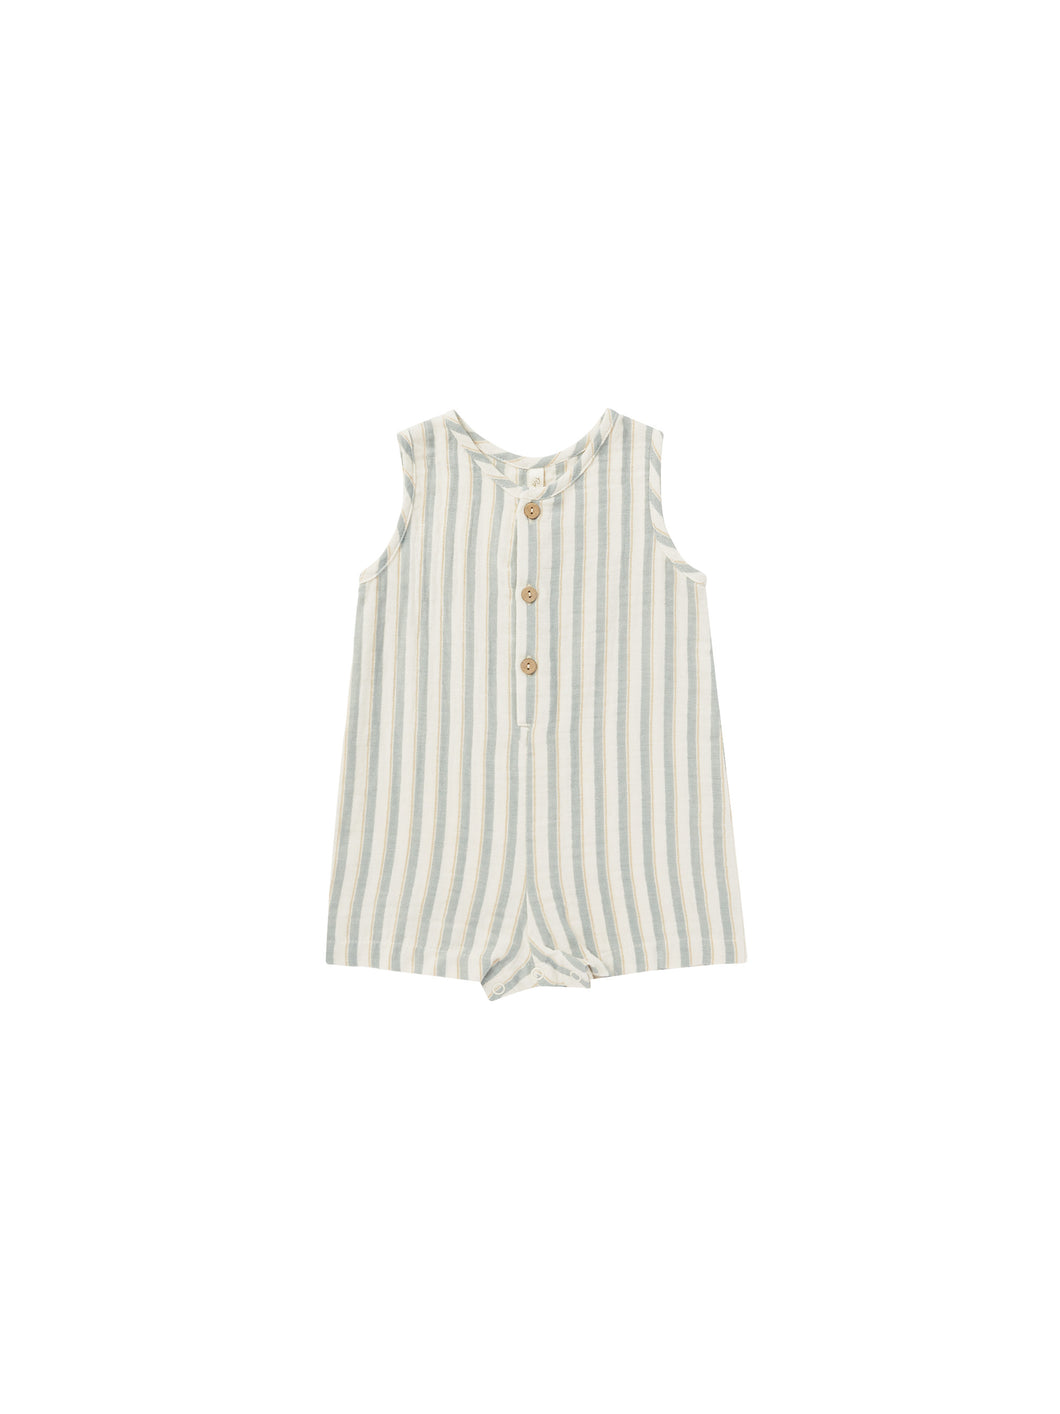 Cotton sleeveless baby romper featuring a cream and blue stripe and buttons down the middle. 